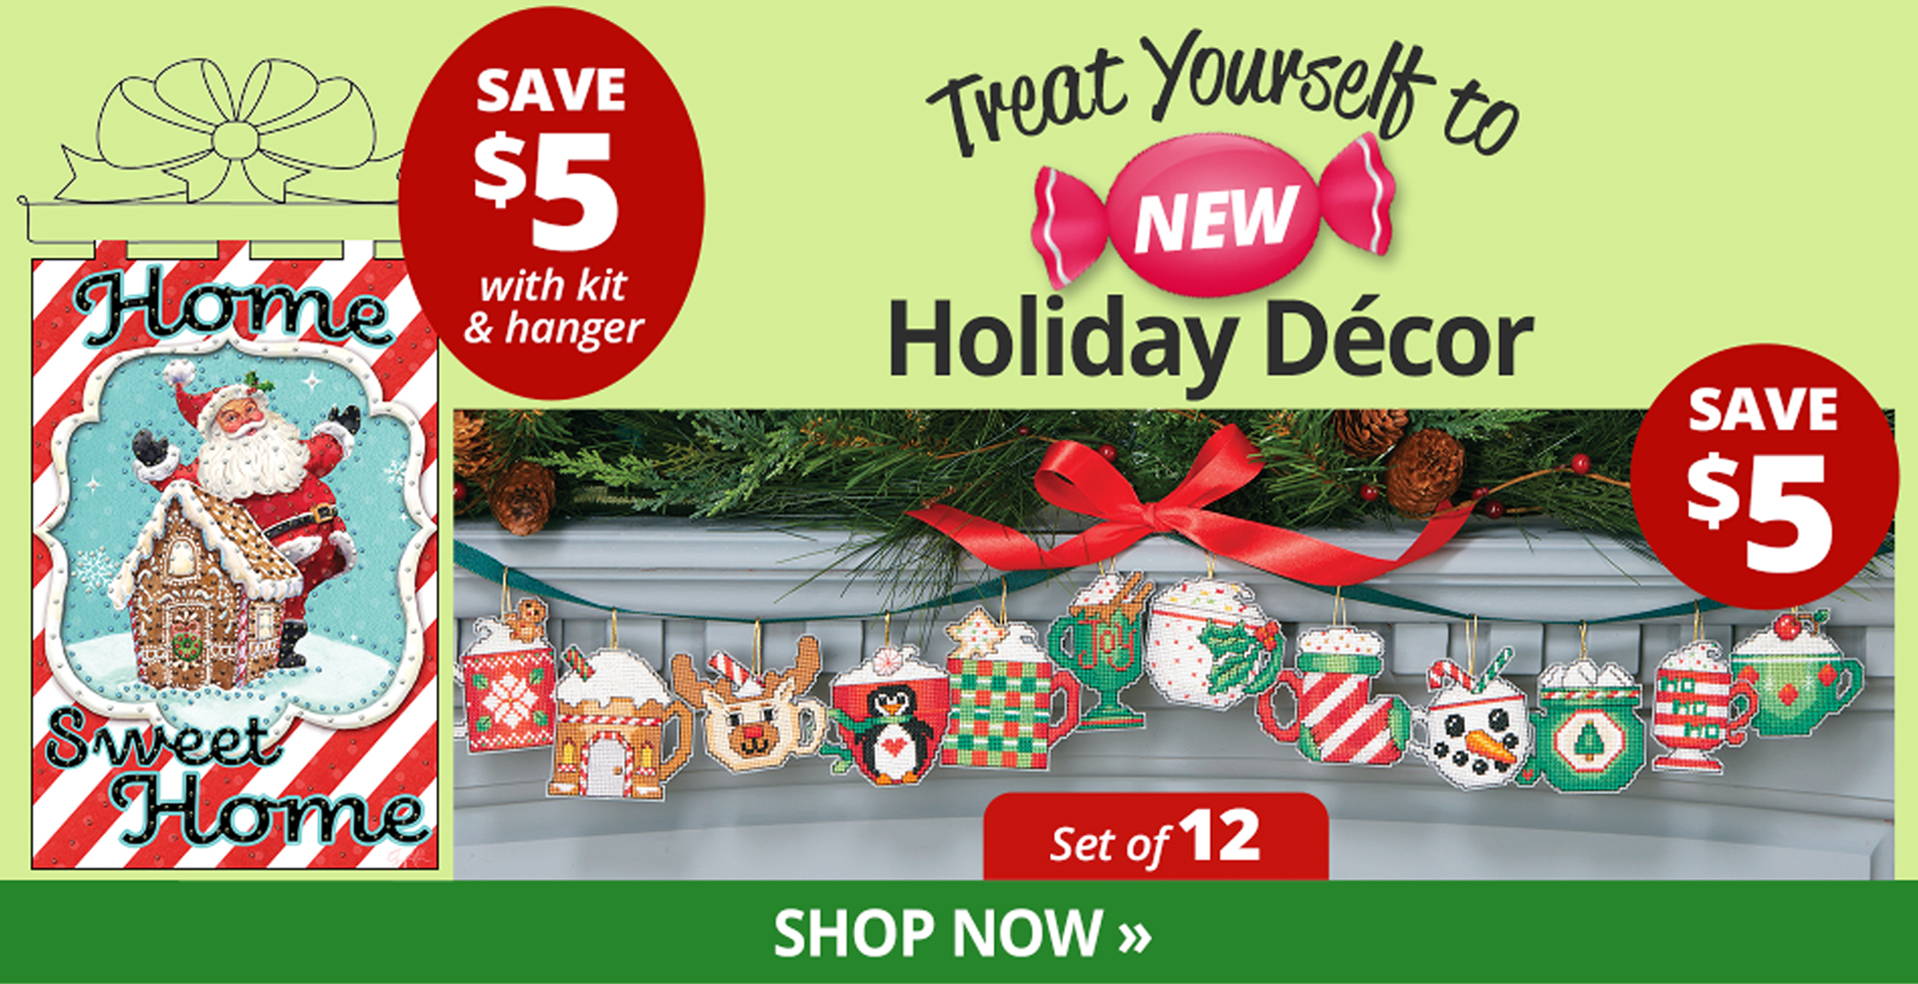 Treat Yourself to NEW Holiday Décor